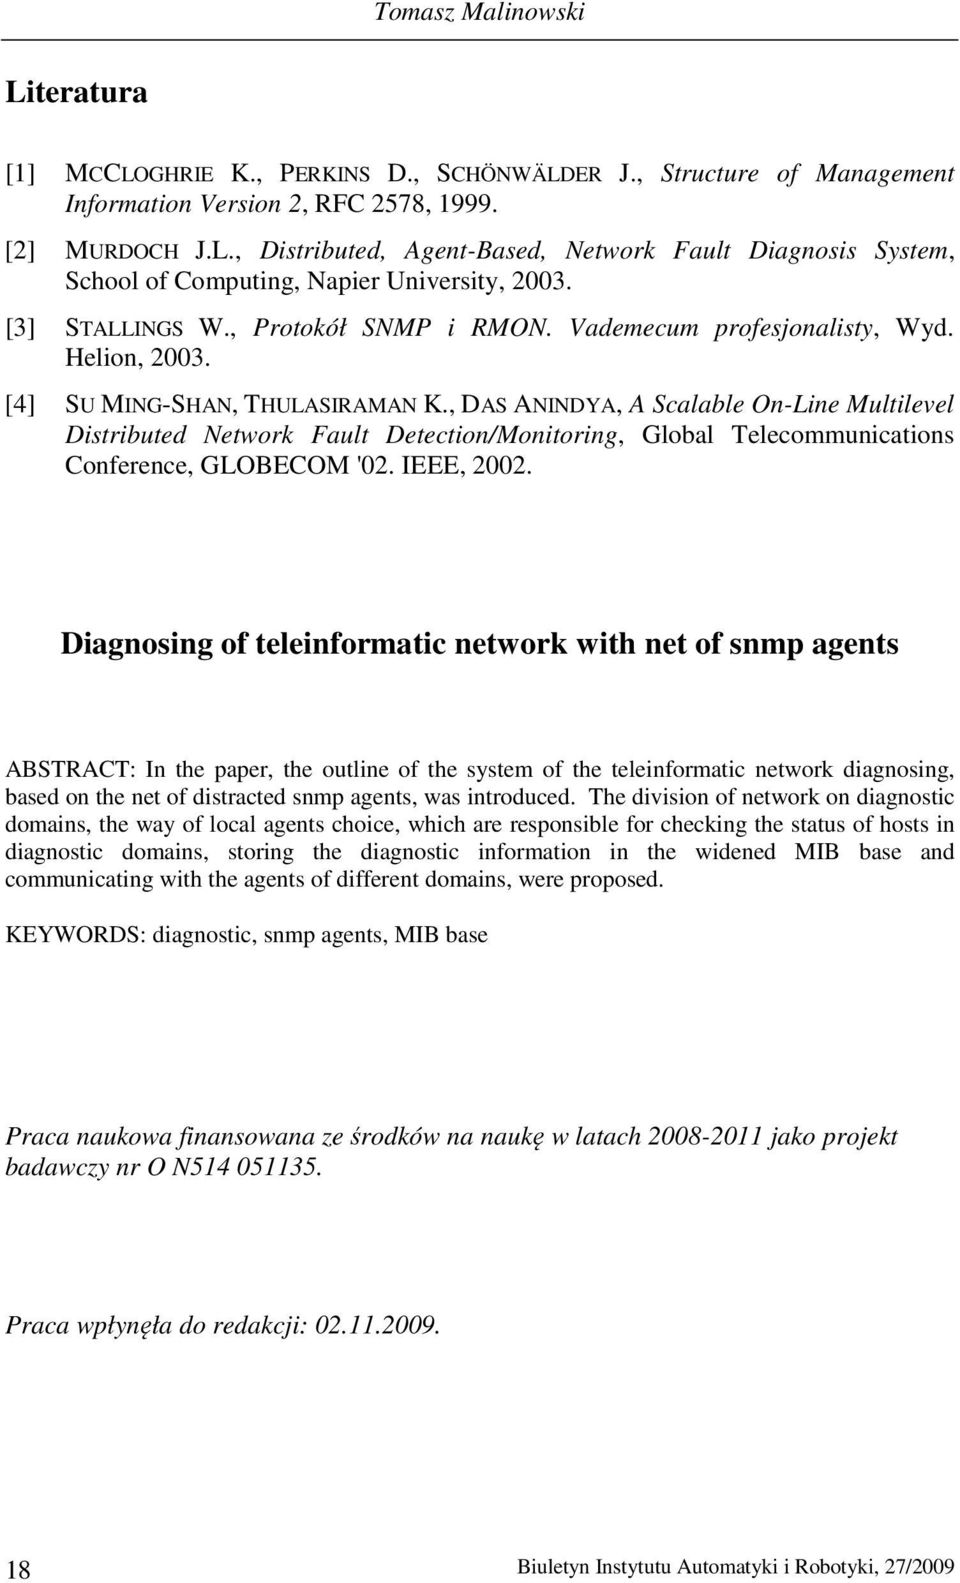 , DAS ANINDYA, A Scalable On-Line Multilevel Distributed Network Fault Detection/Monitoring, Global Telecommunications Conference, GLOBECOM '02. IEEE, 2002.